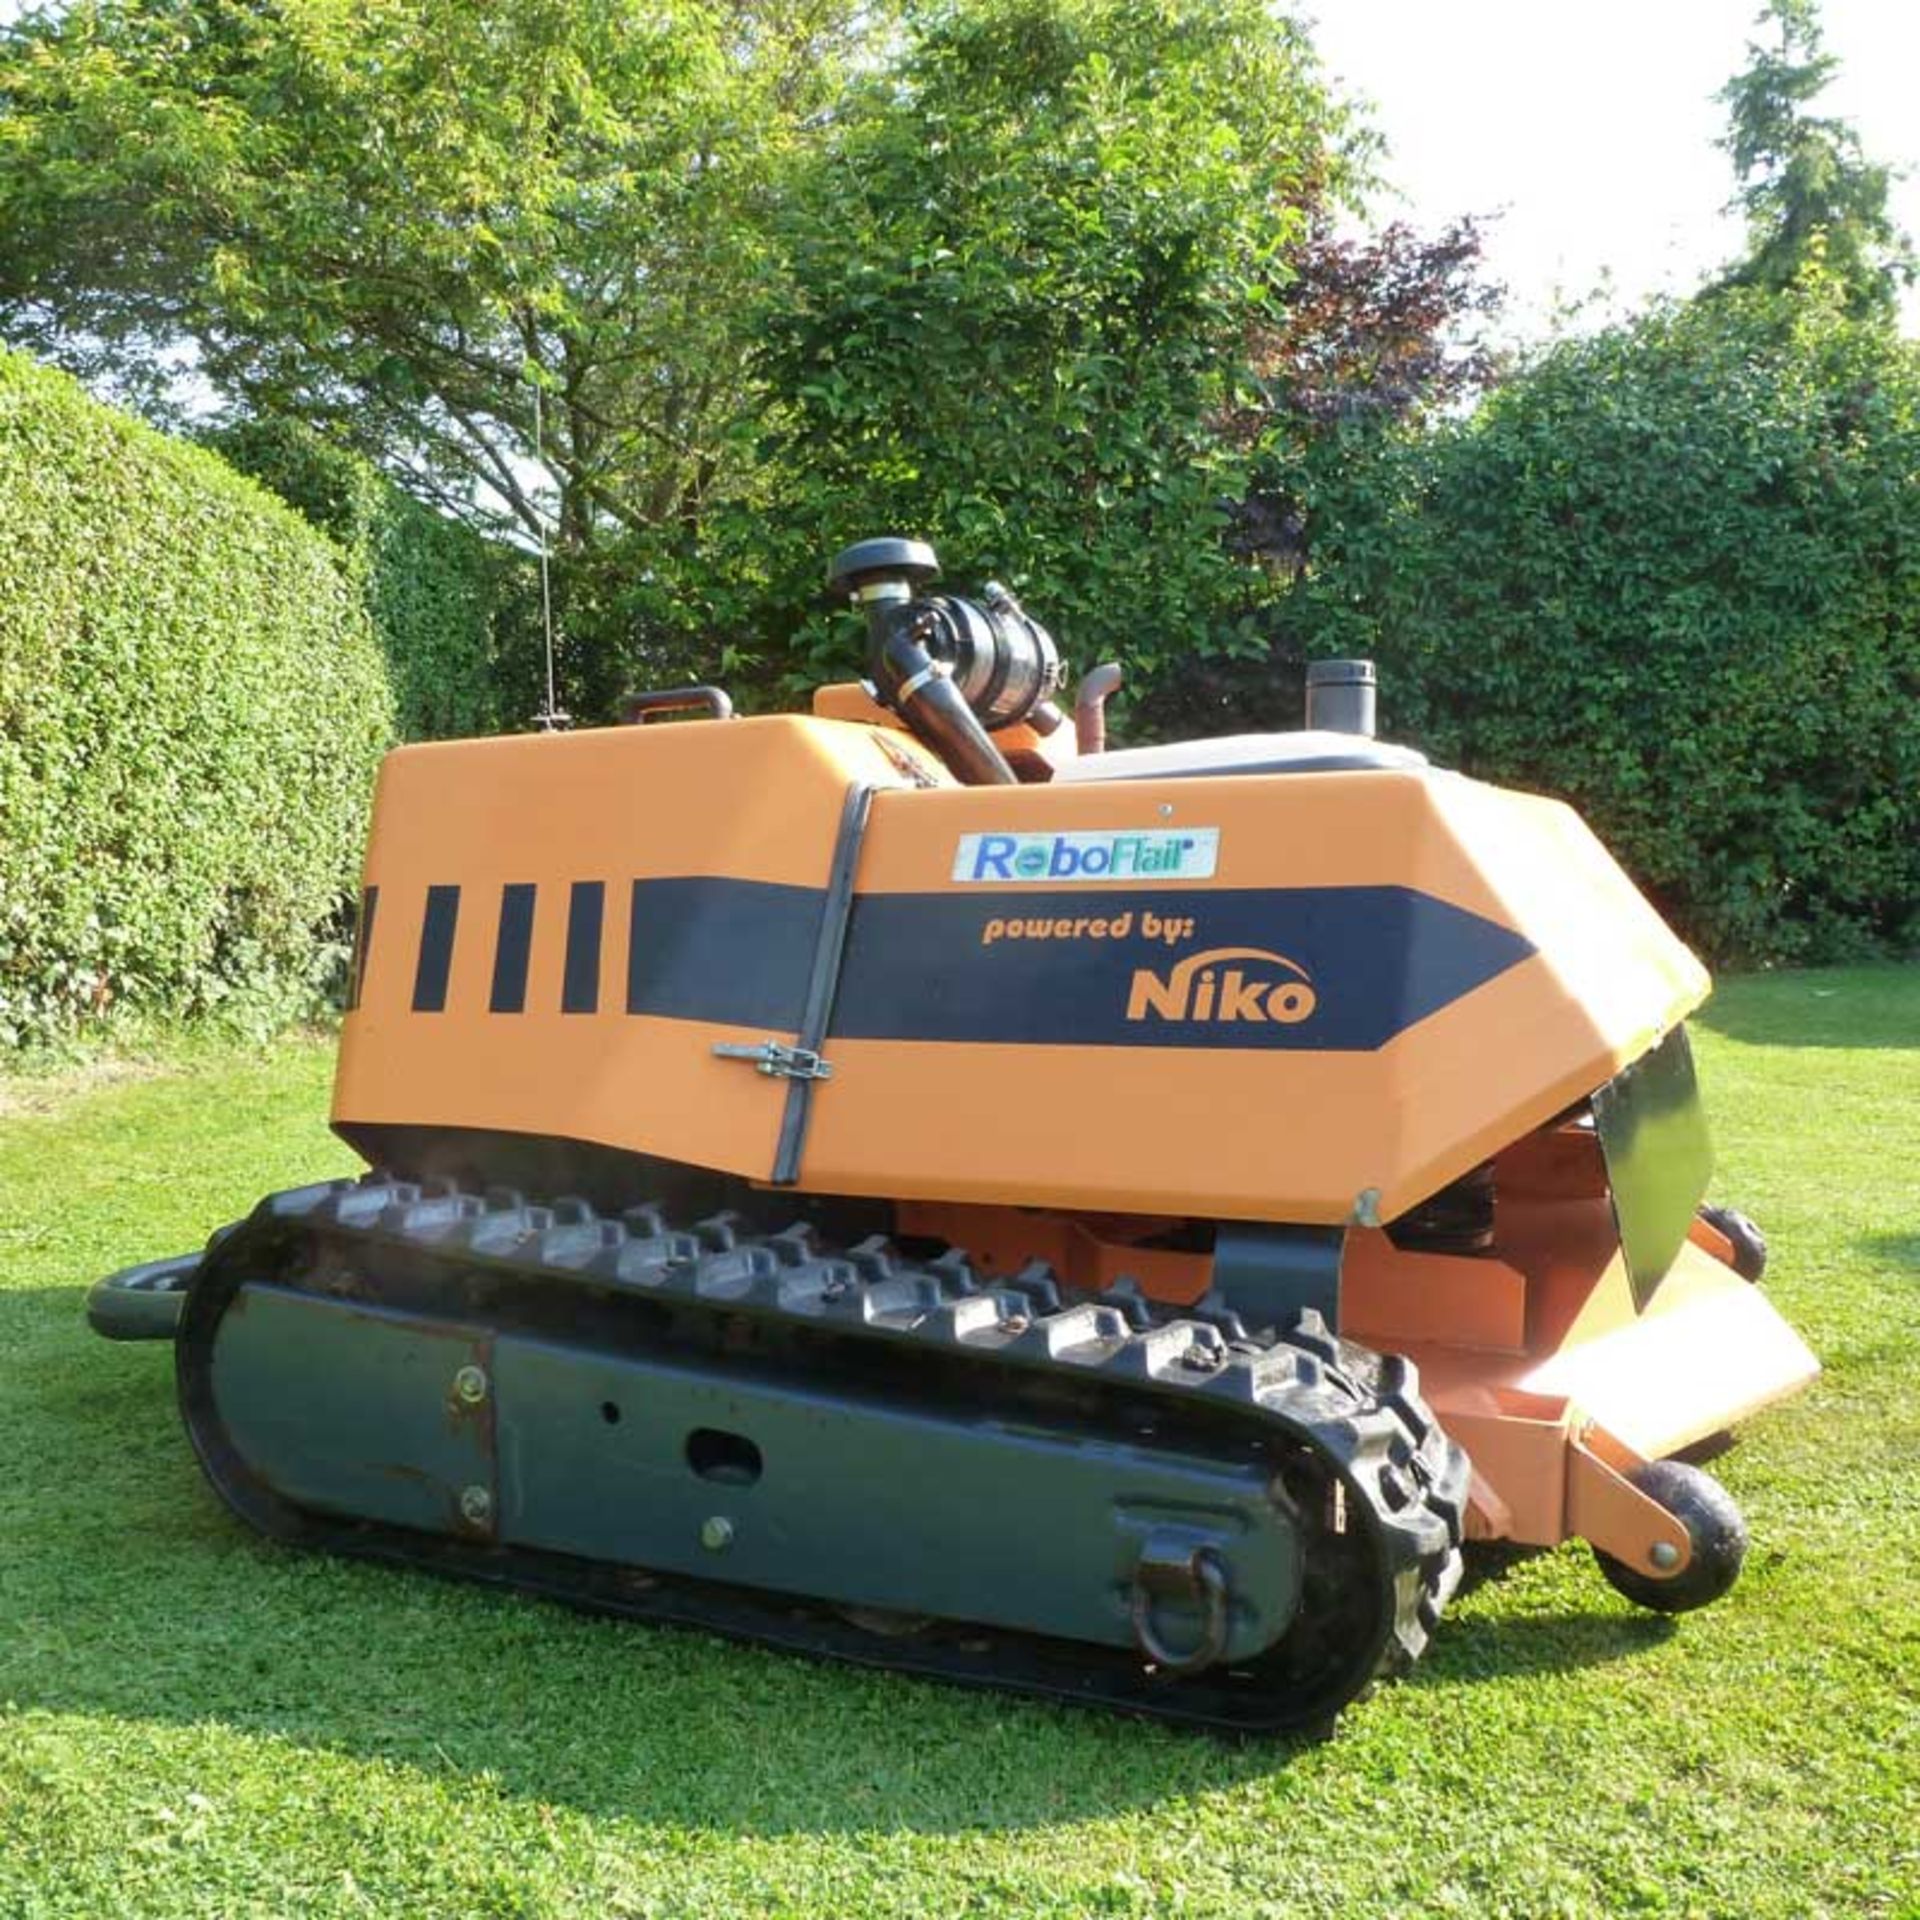 RoboFlail Remote Controlled 55 Slope Mower